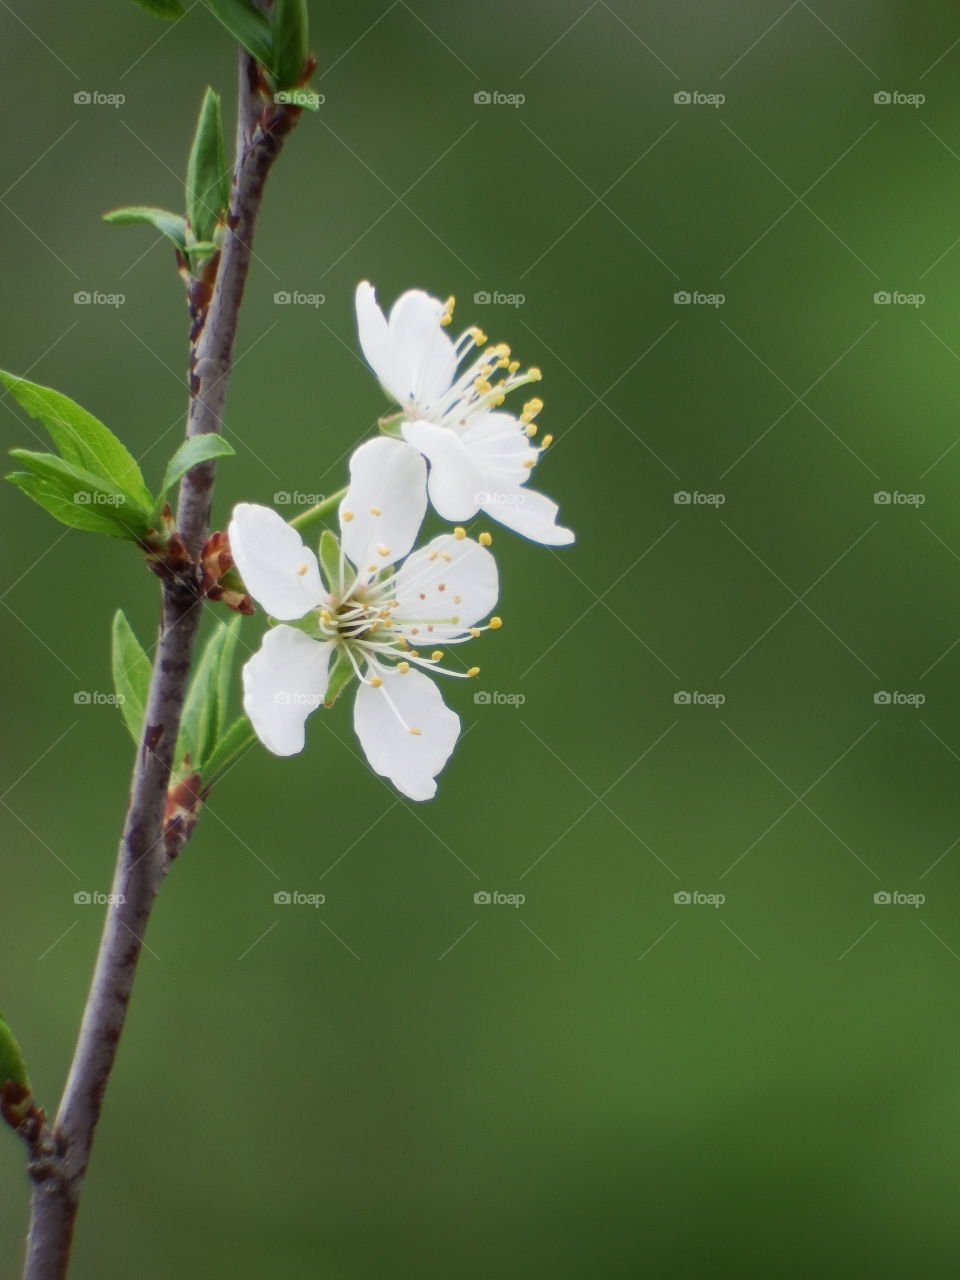 White tree blossoms on a single branch against a soft focus green background